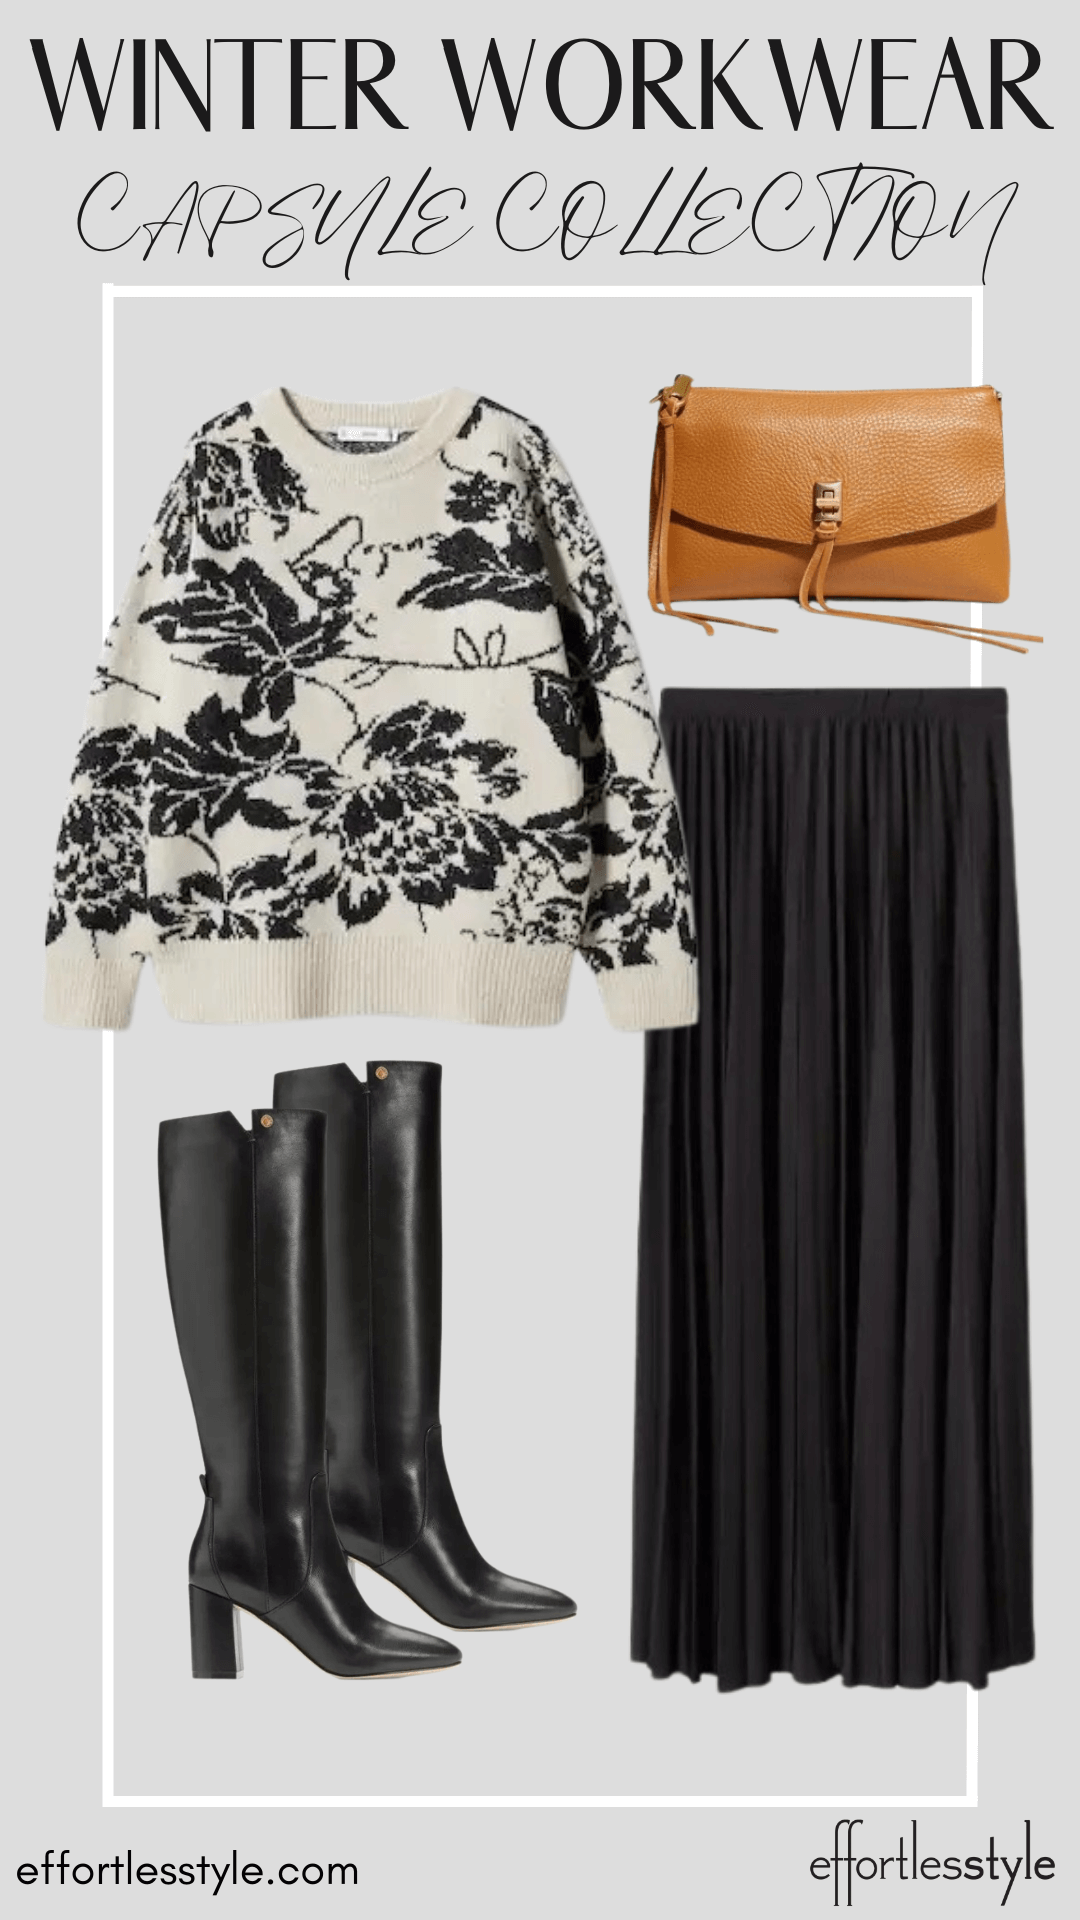 How To Wear Our Winter Workwear Capsule Wardrobe - Part 2 Printed Sweater & Long Skirt how to wear a sweater with a long skirt to the office how to style your long skirt for the office how to wear tall boots to work classic crossbody for winter